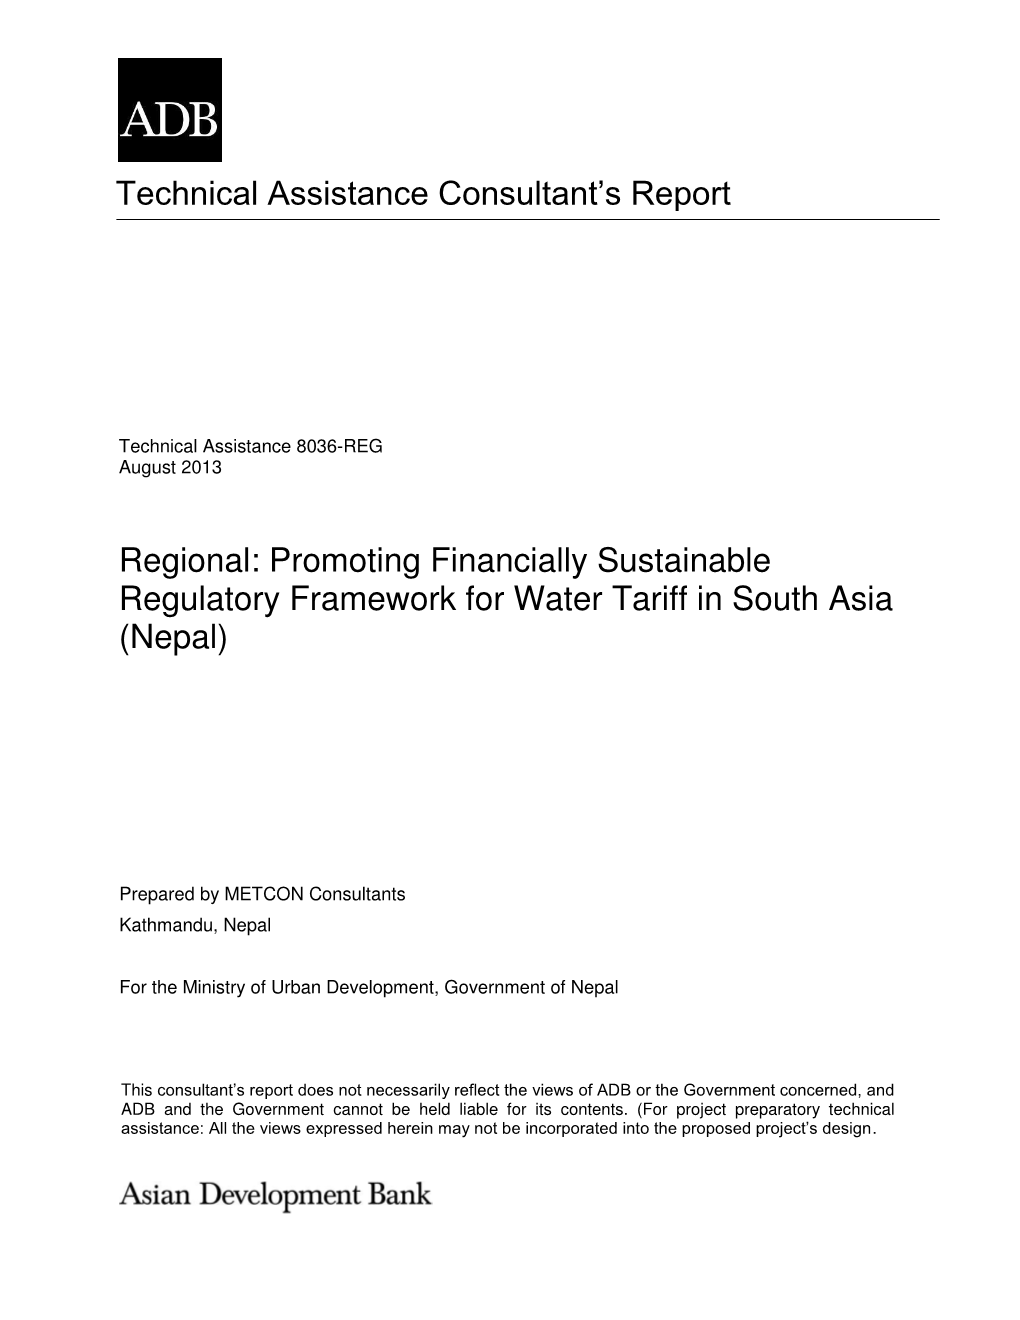 Promoting Financially Sustainable Regulatory Framework for Water Tariff in South Asia (Nepal)